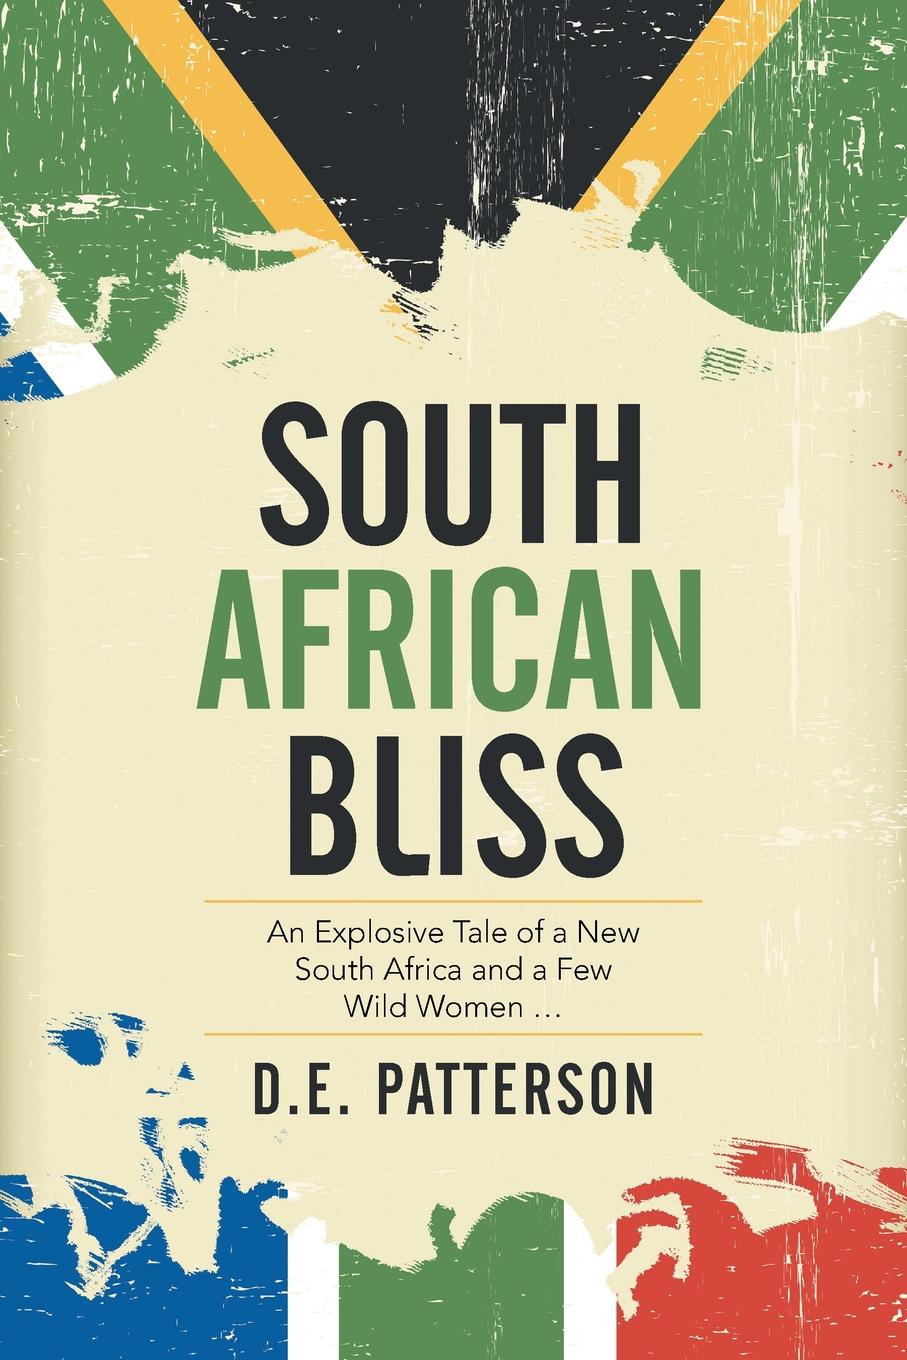 South African Bliss. An Explosive Tale of a New South Africa and a Few Wild Women ...